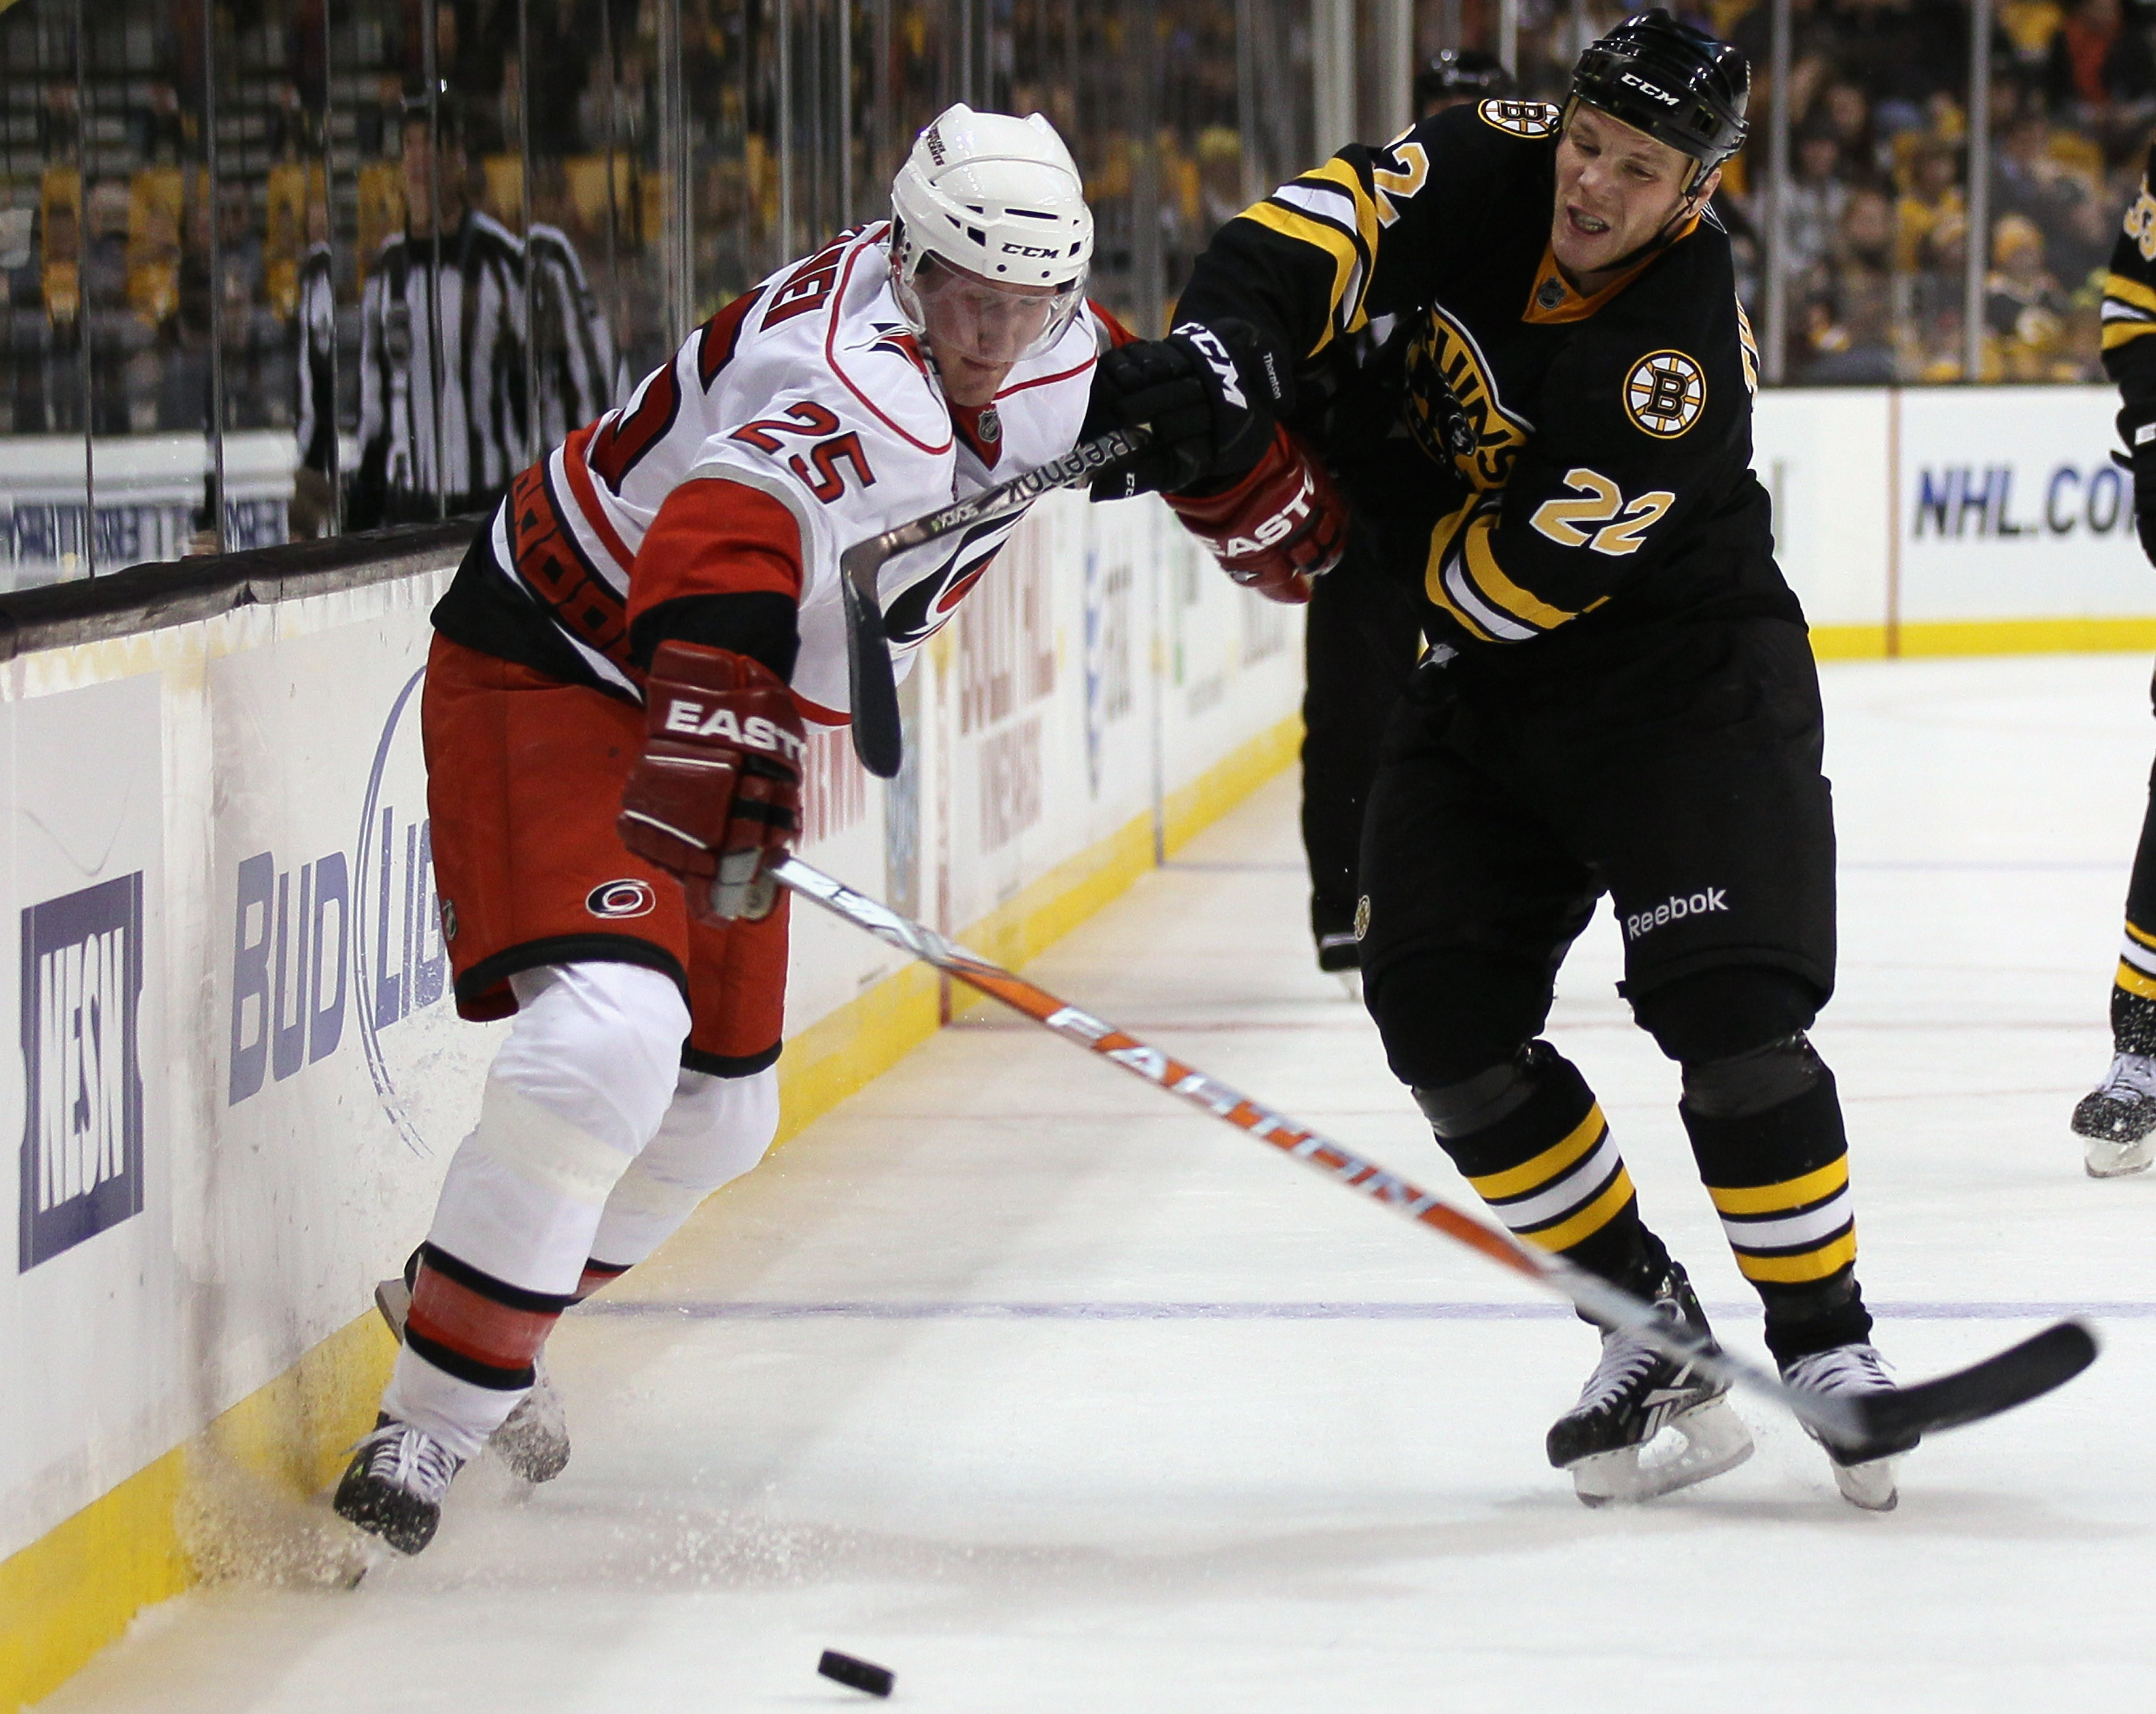 BOSTON - NOVEMBER 26:  Shawn Thornton #22 of the Boston Bruins and Joni Pitkanen #25 of the Carolina Hurricanes fight for the puck on November 26, 2010 at the TD Garden in Boston, Massachusetts. The Hurricanes defeated the Bruins 3-0.  (Photo by Elsa/Gett